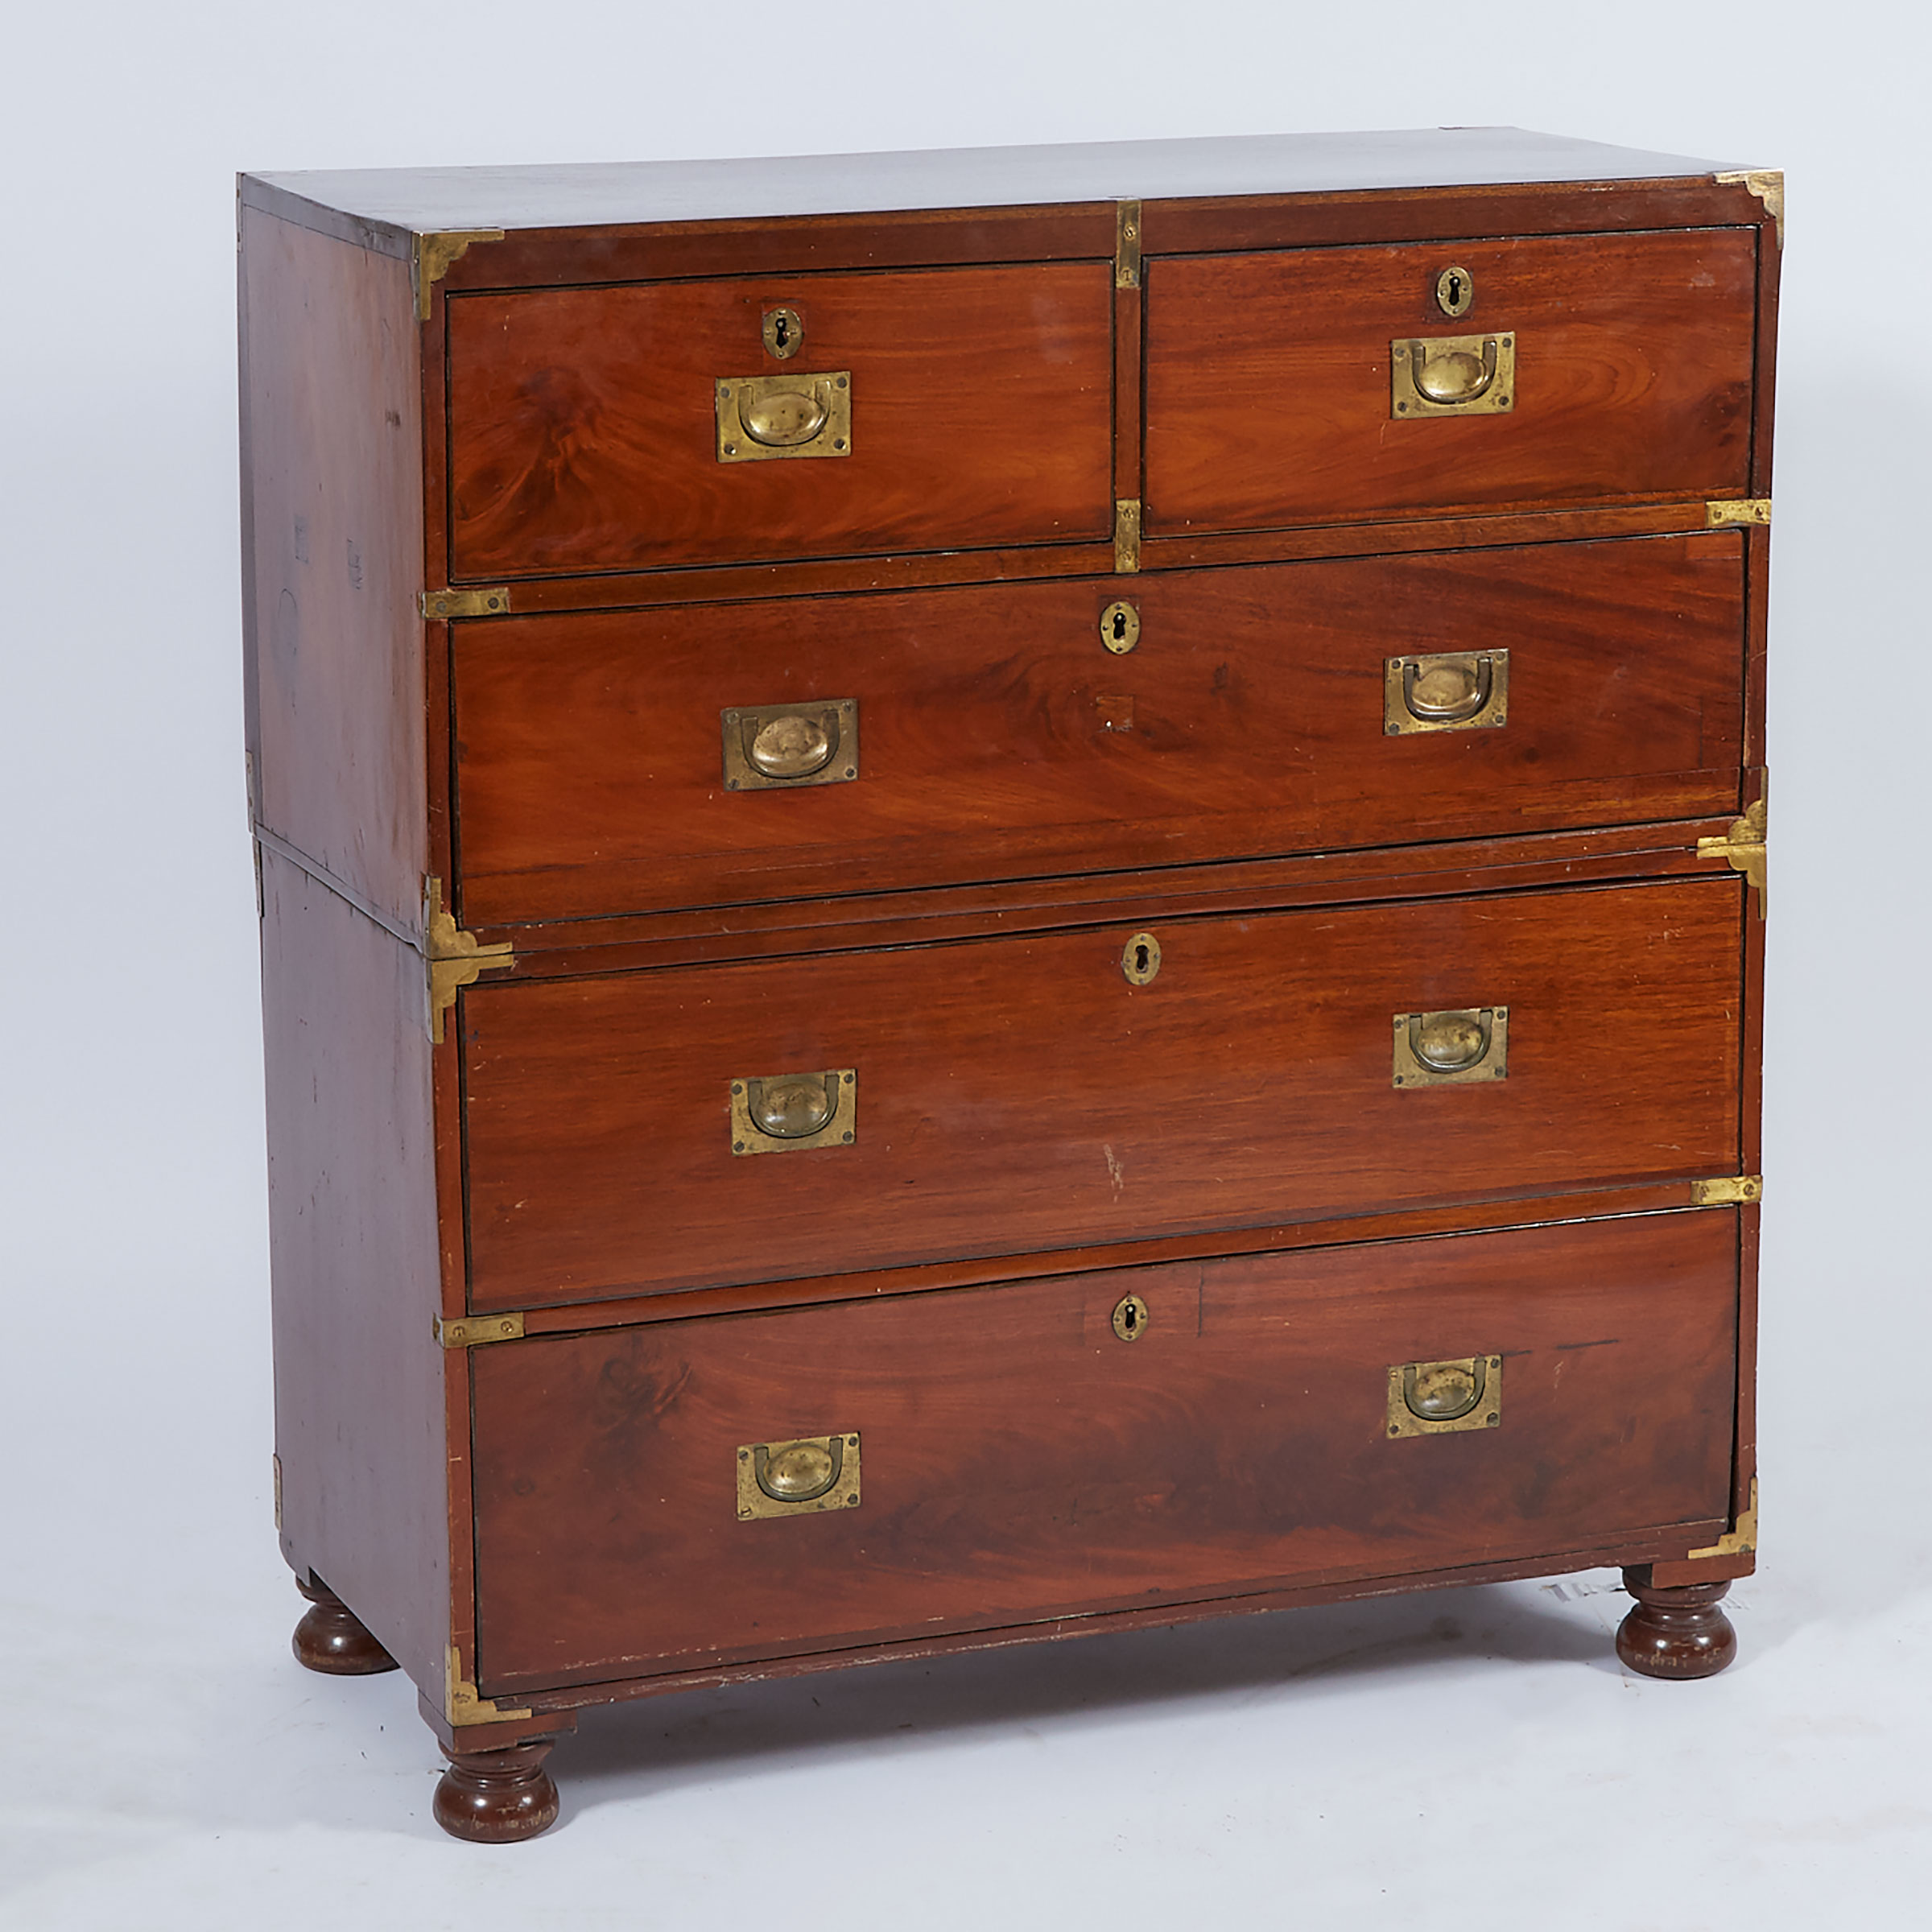 Brass Bound Mahogany Campaign Chest, early 19th century